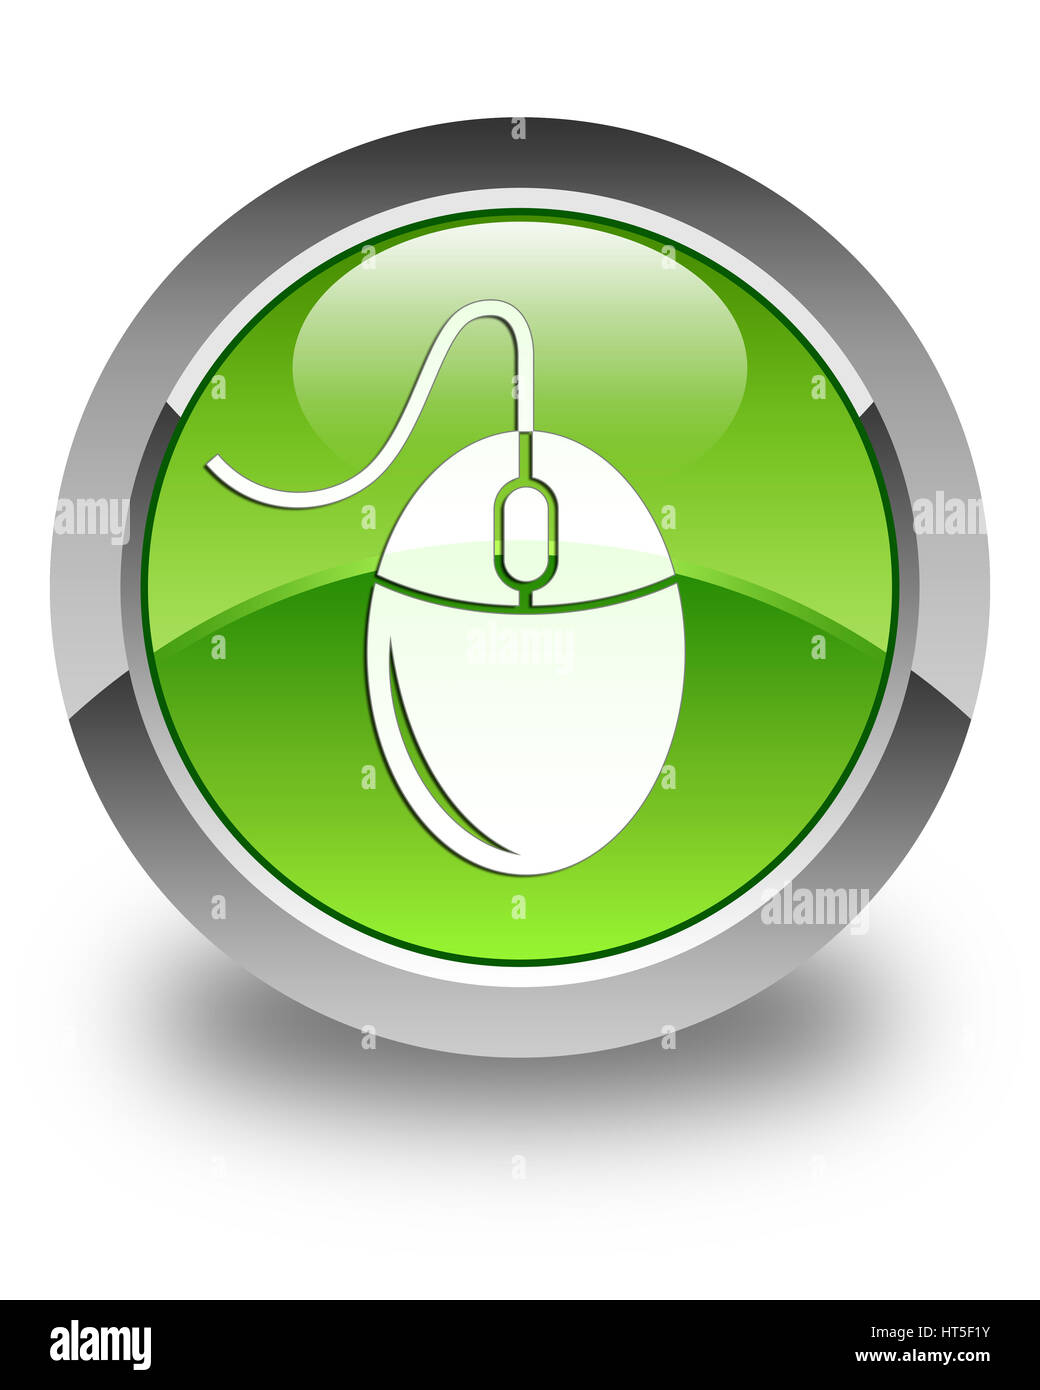 Mouse icon isolated on glossy green round button abstract illustration Stock Photo